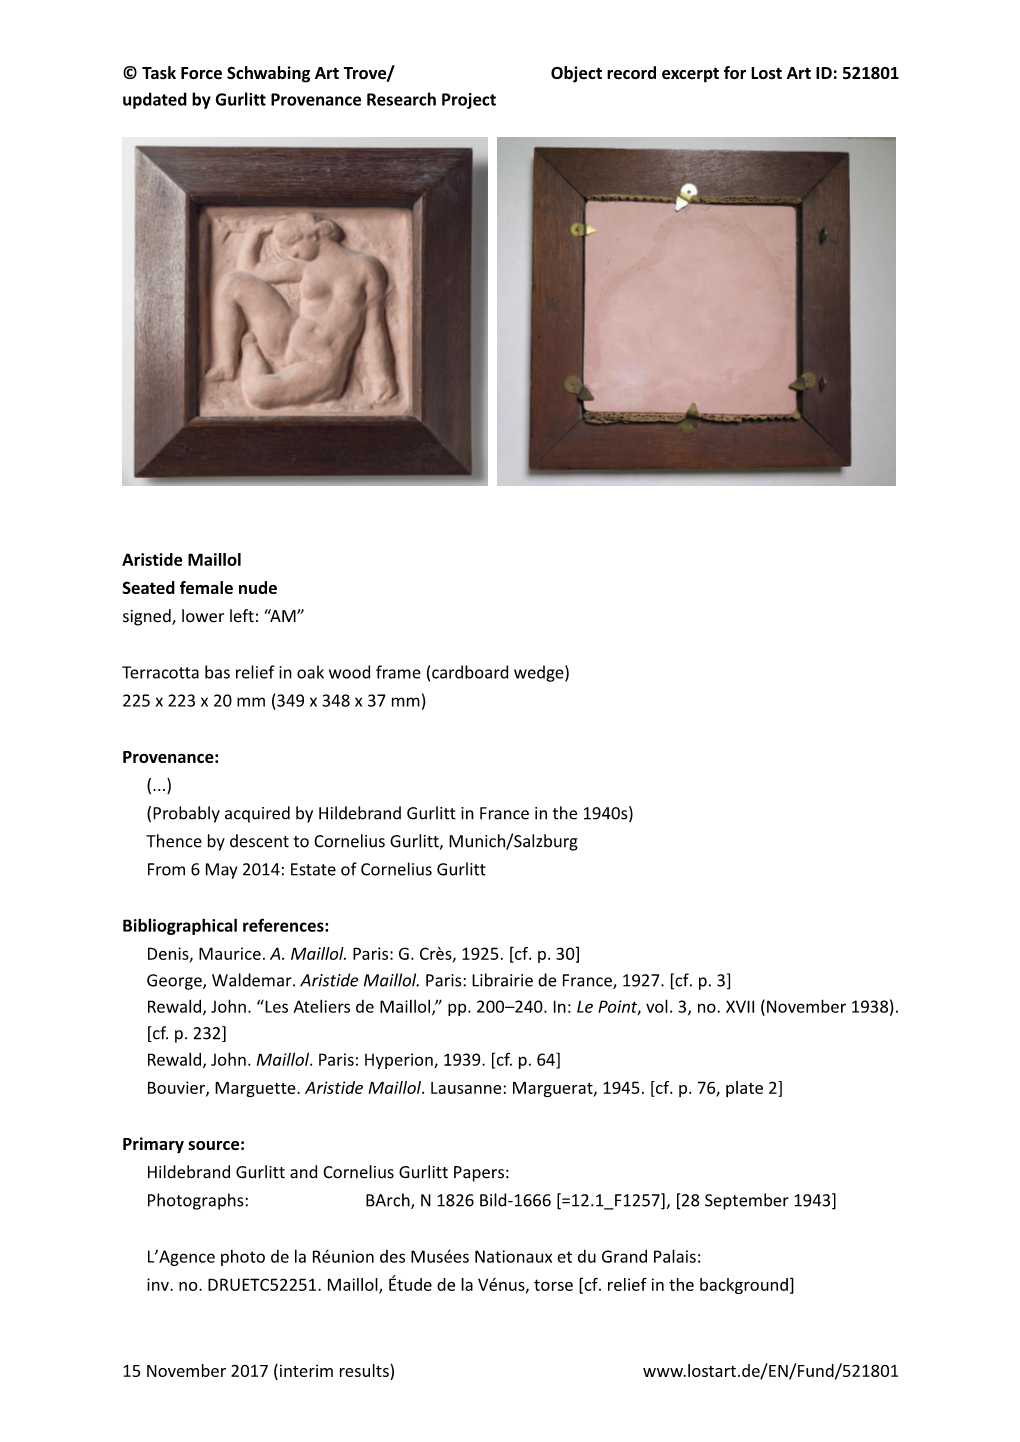 Object Record Excerpt for Lost Art ID: 521801 Updated by Gurlitt Provenance Research Project